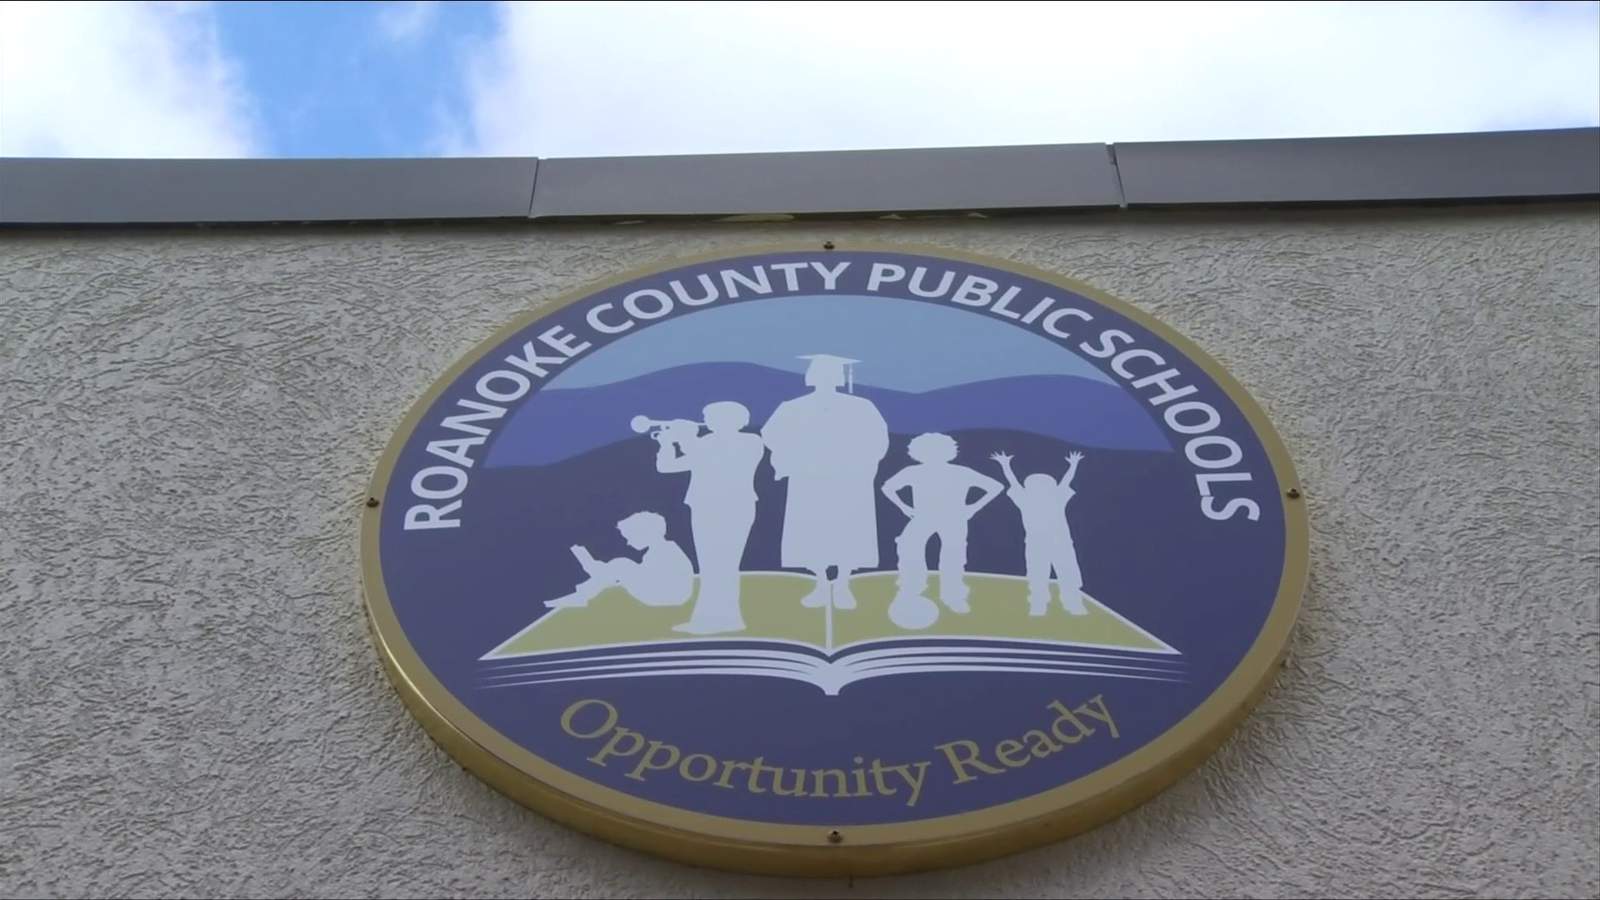 Roanoke County fourth-grade students to return to full-time in-person instruction Jan. 25, district says